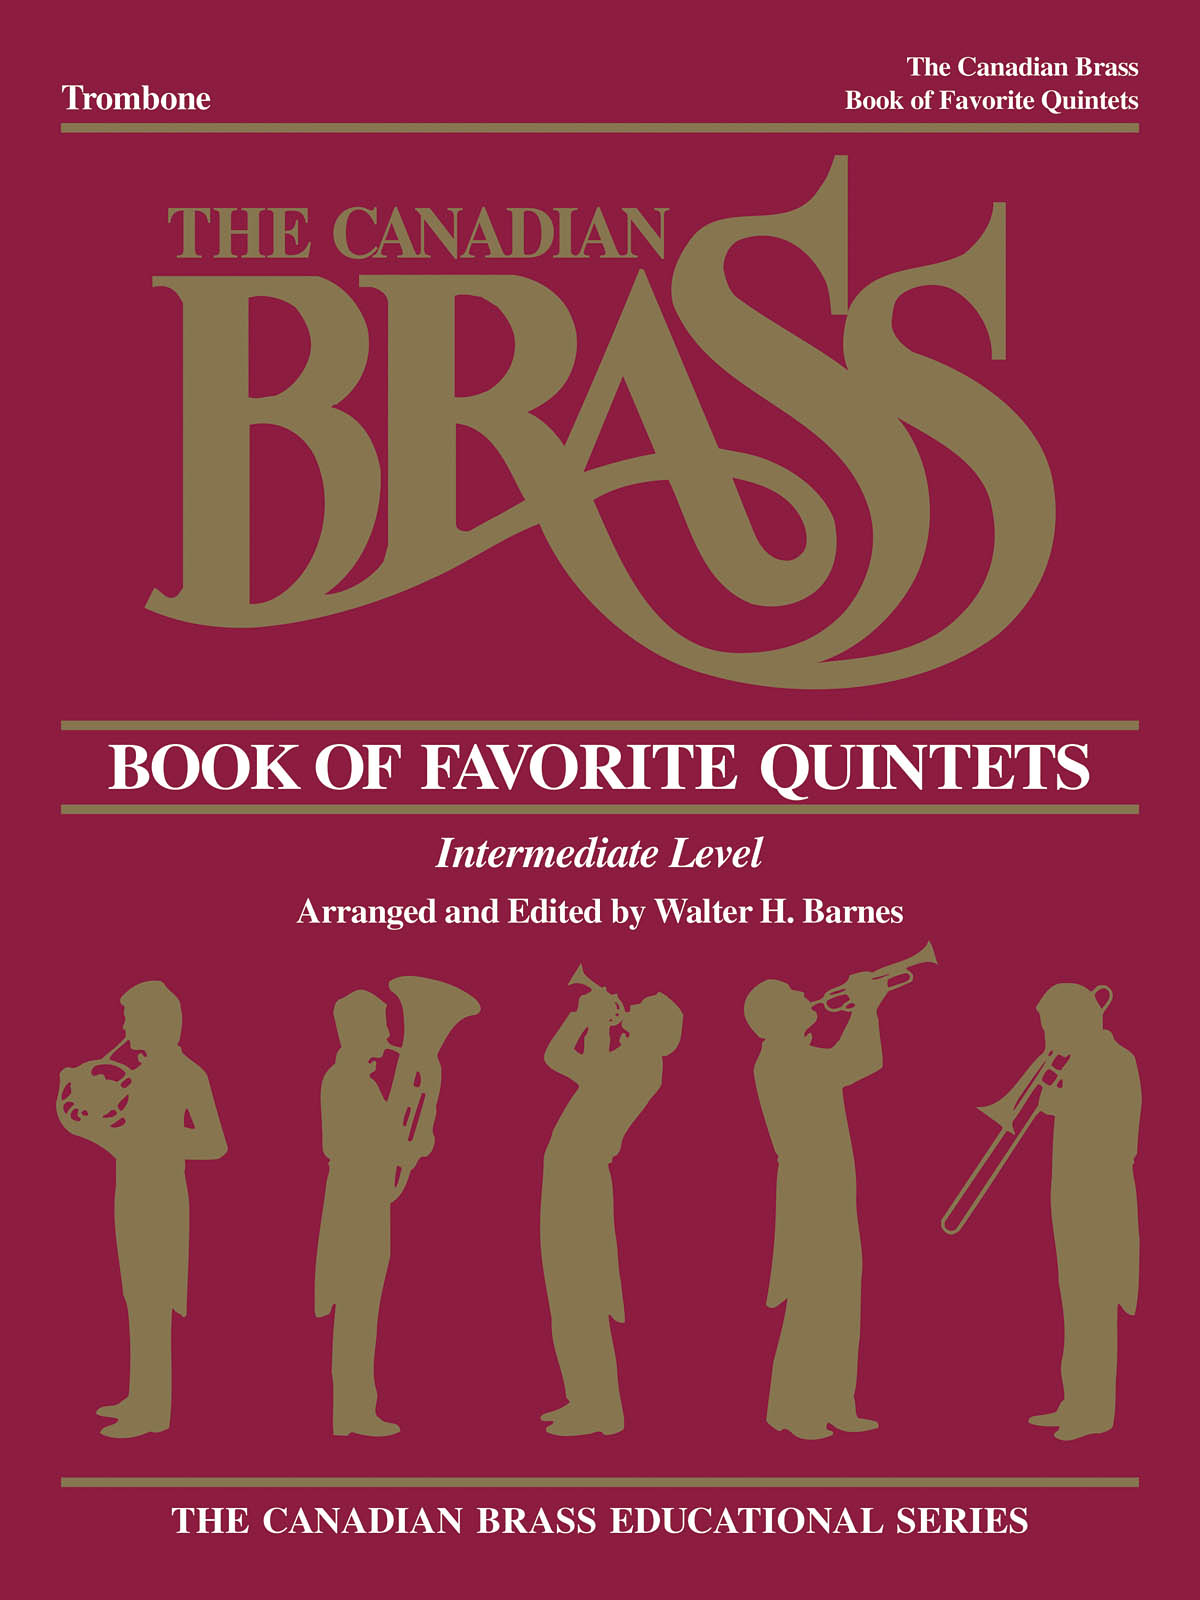 The Canadian Brass: The Canadian Brass Book of Favorite Quintets: Trombone: